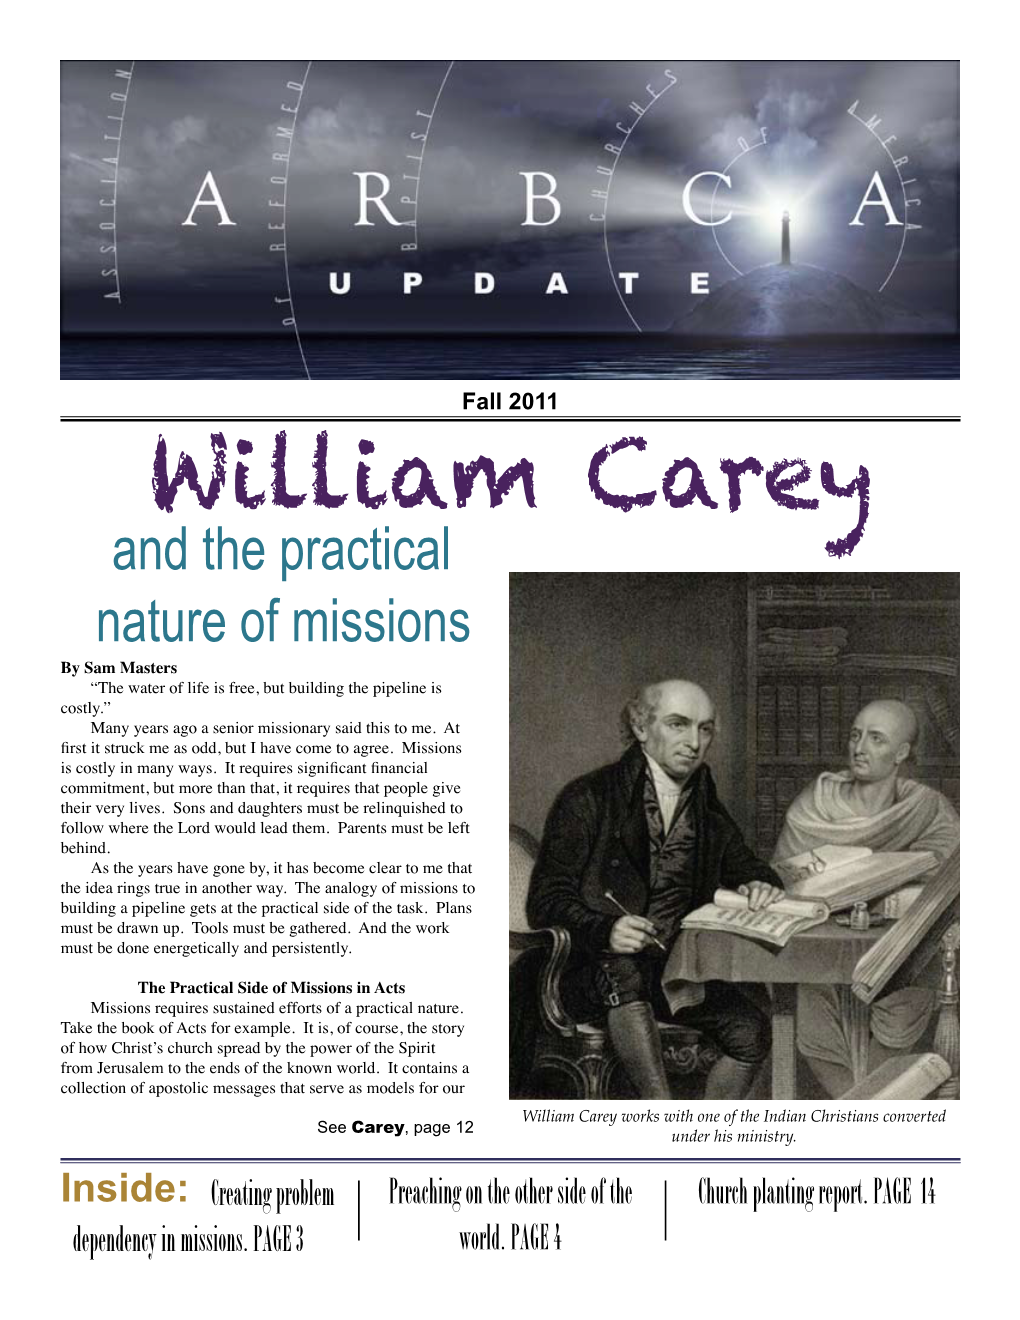 William Carey Works with One of the Indian Christians Converted See Carey, Page 12 Under His Ministry